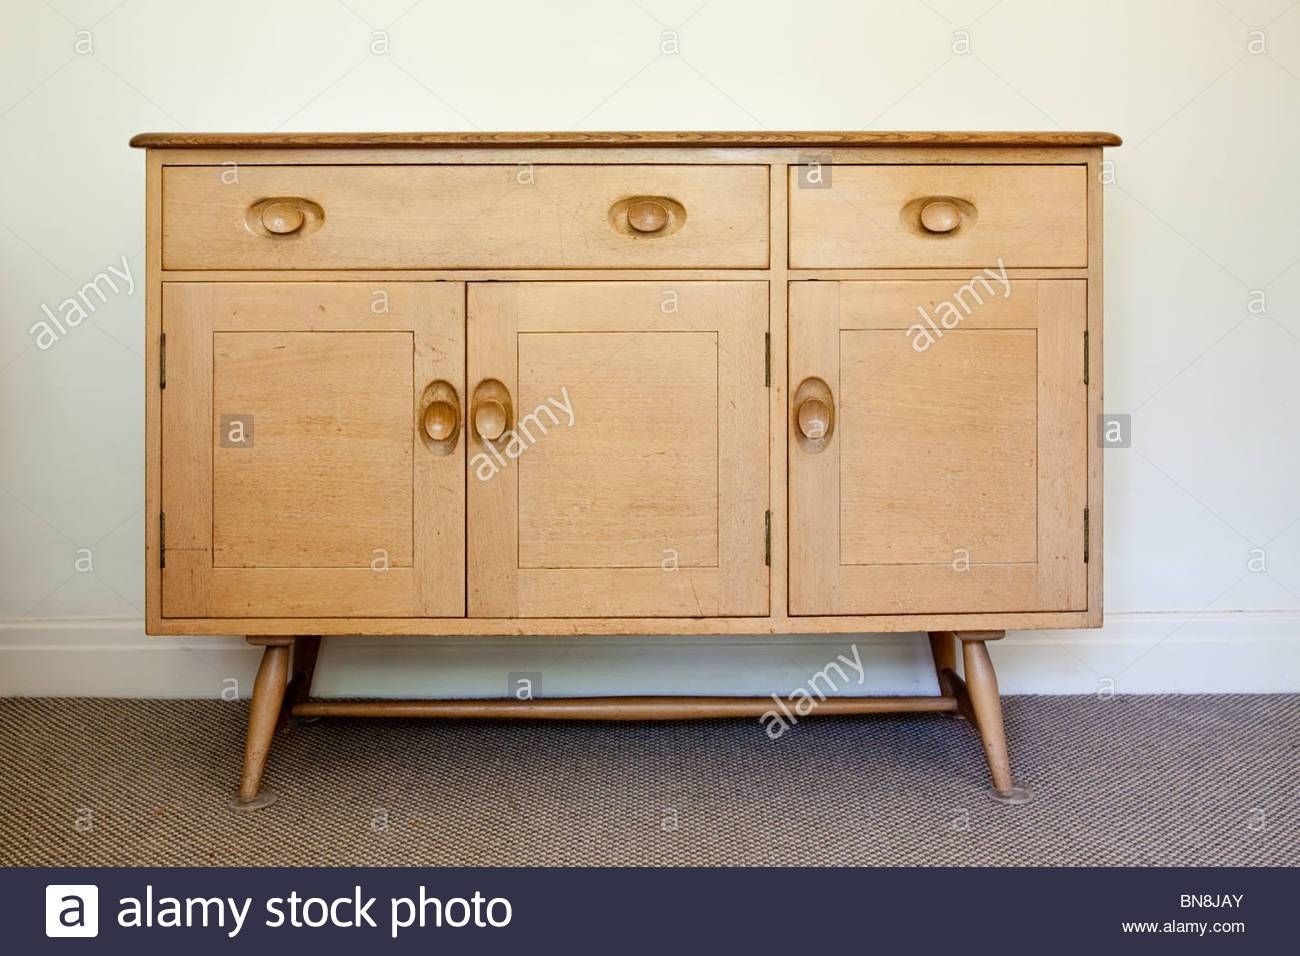 1950s Furniture Stock Photos & 1950s Furniture Stock Images – Alamy Throughout Most Recent 50s Sideboards (View 9 of 15)